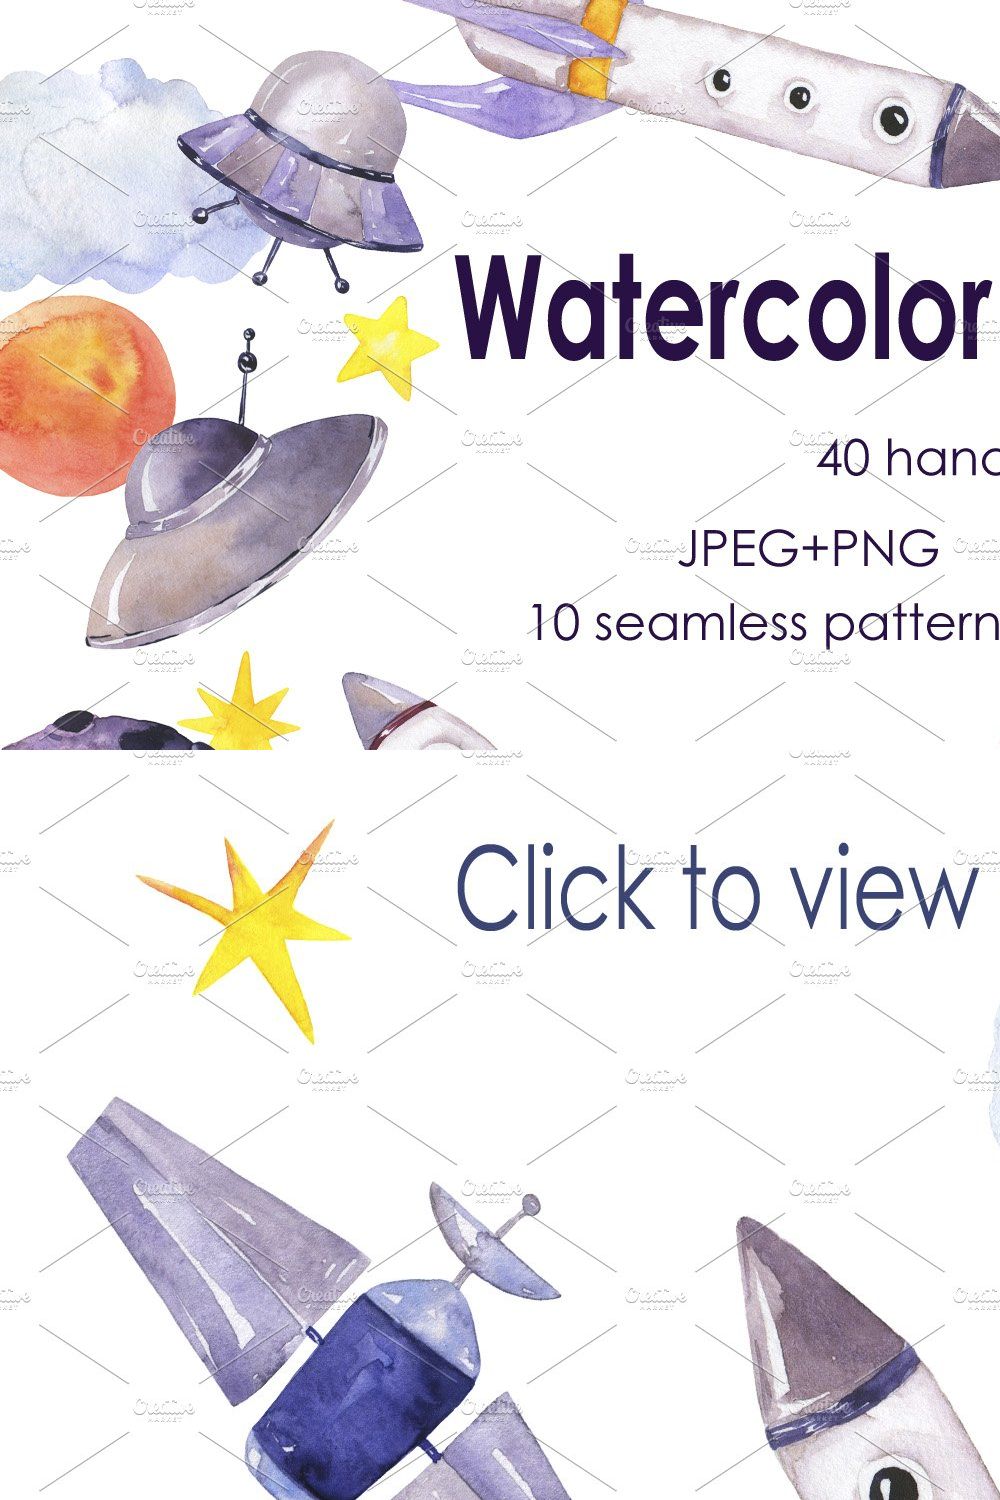 Watercolor space for kids pinterest preview image.